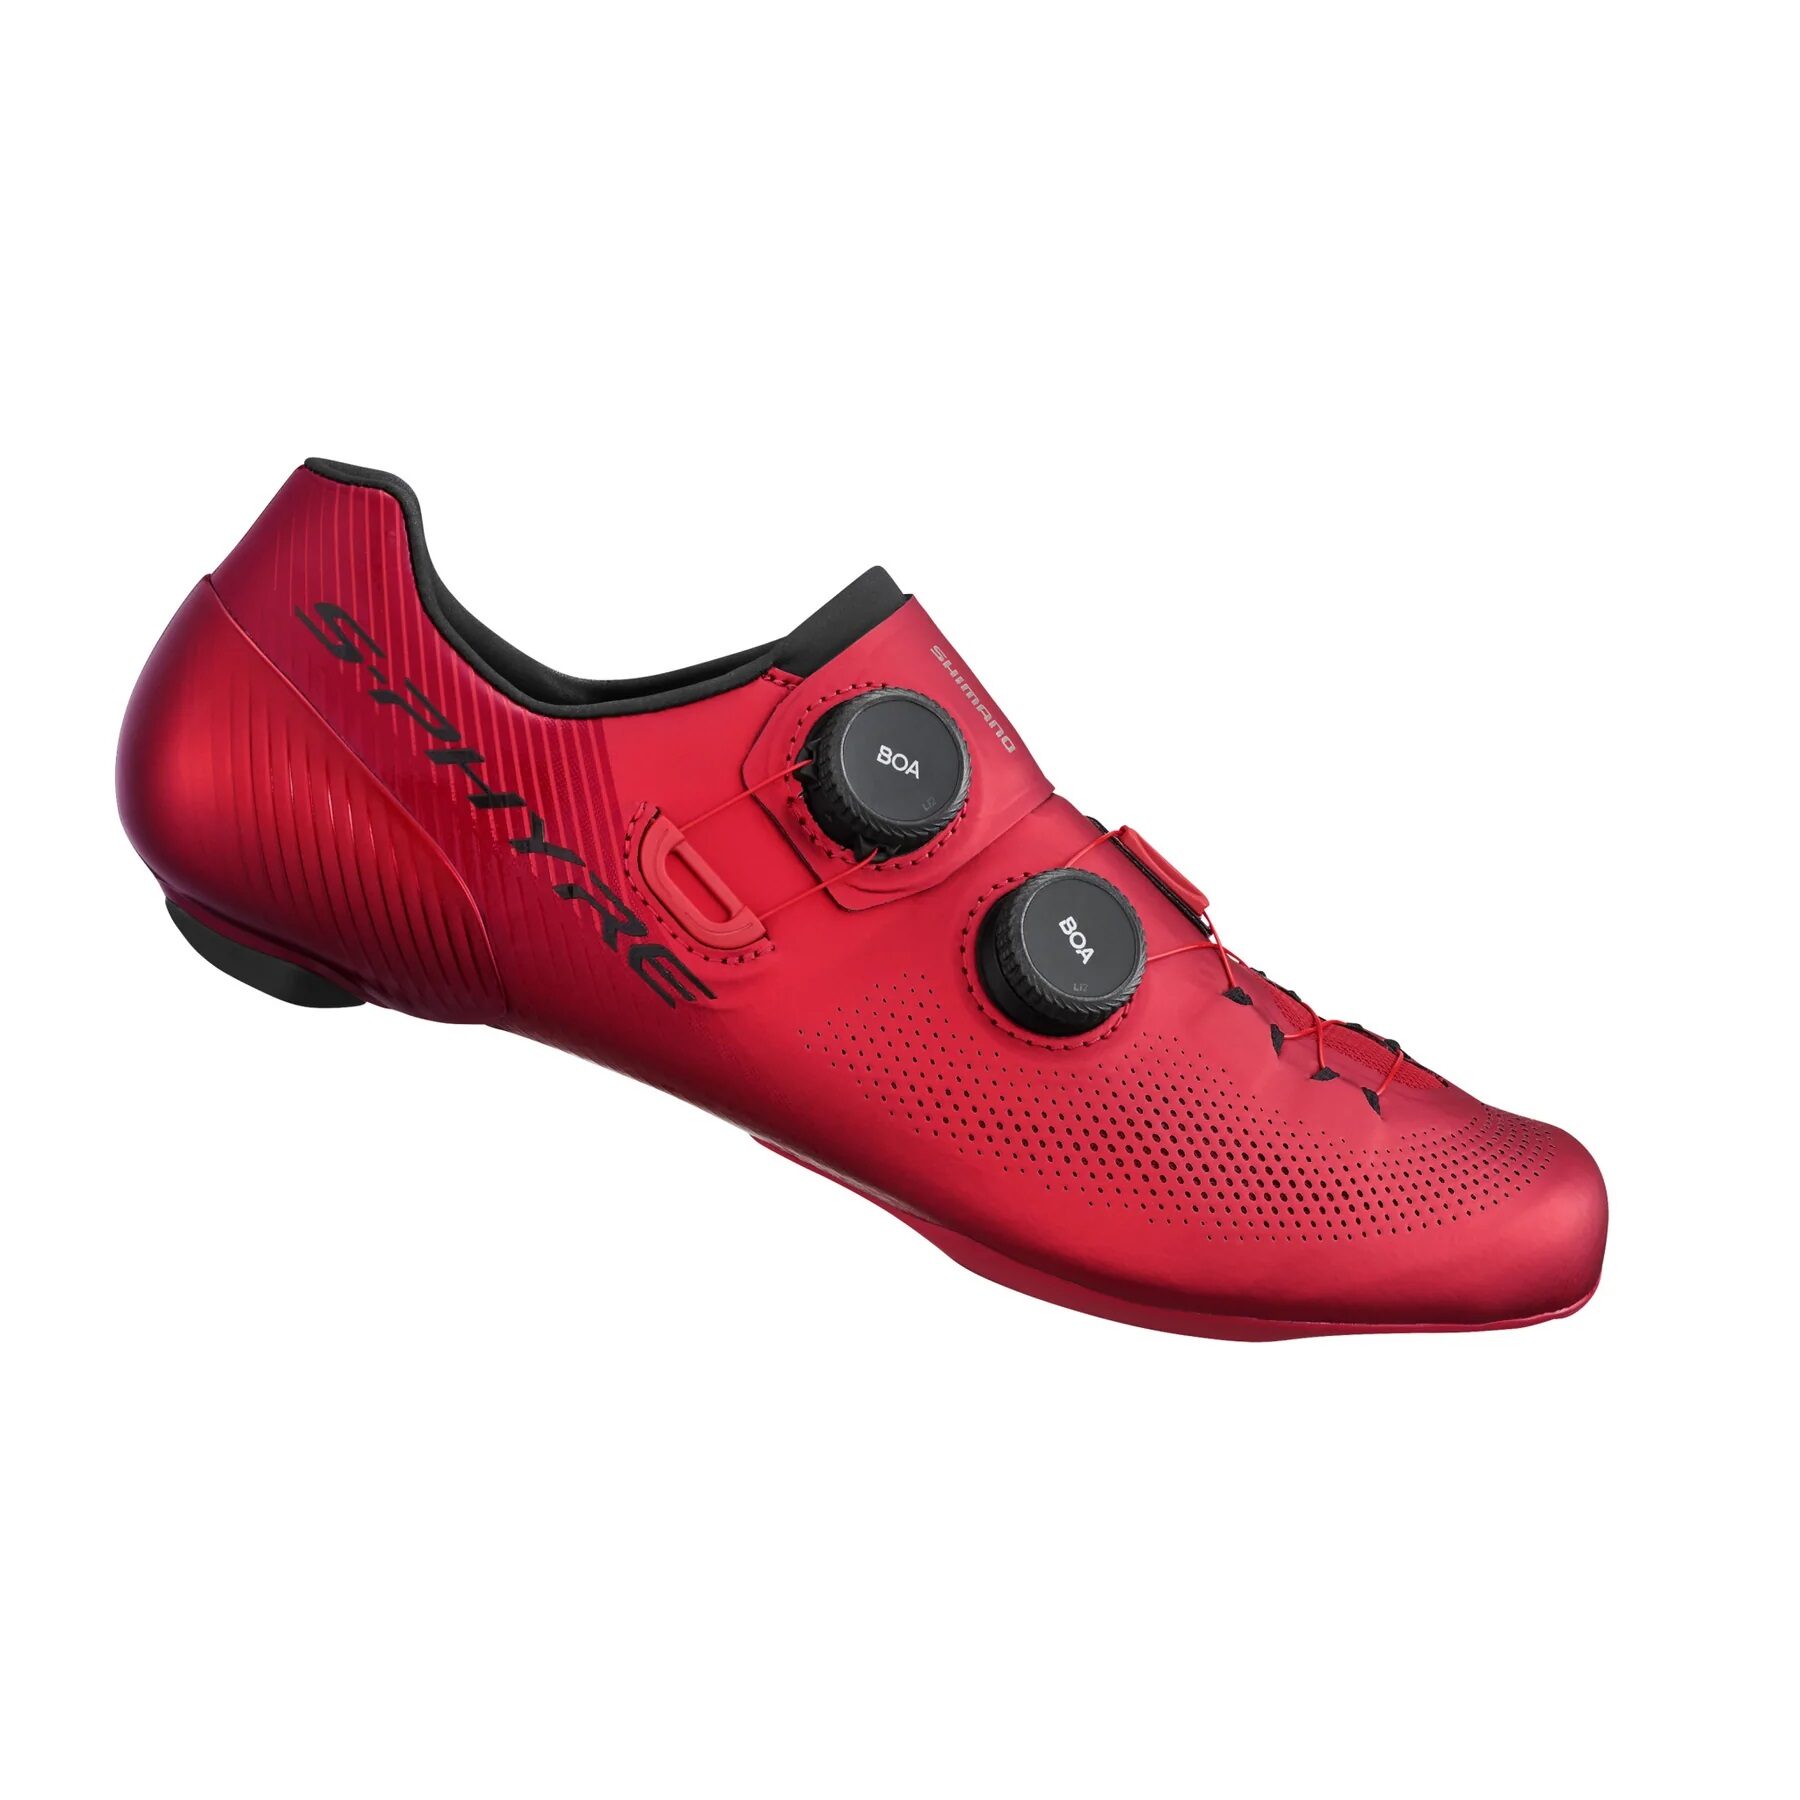 Shimano S-PHYRE RC903 Cycling Shoes